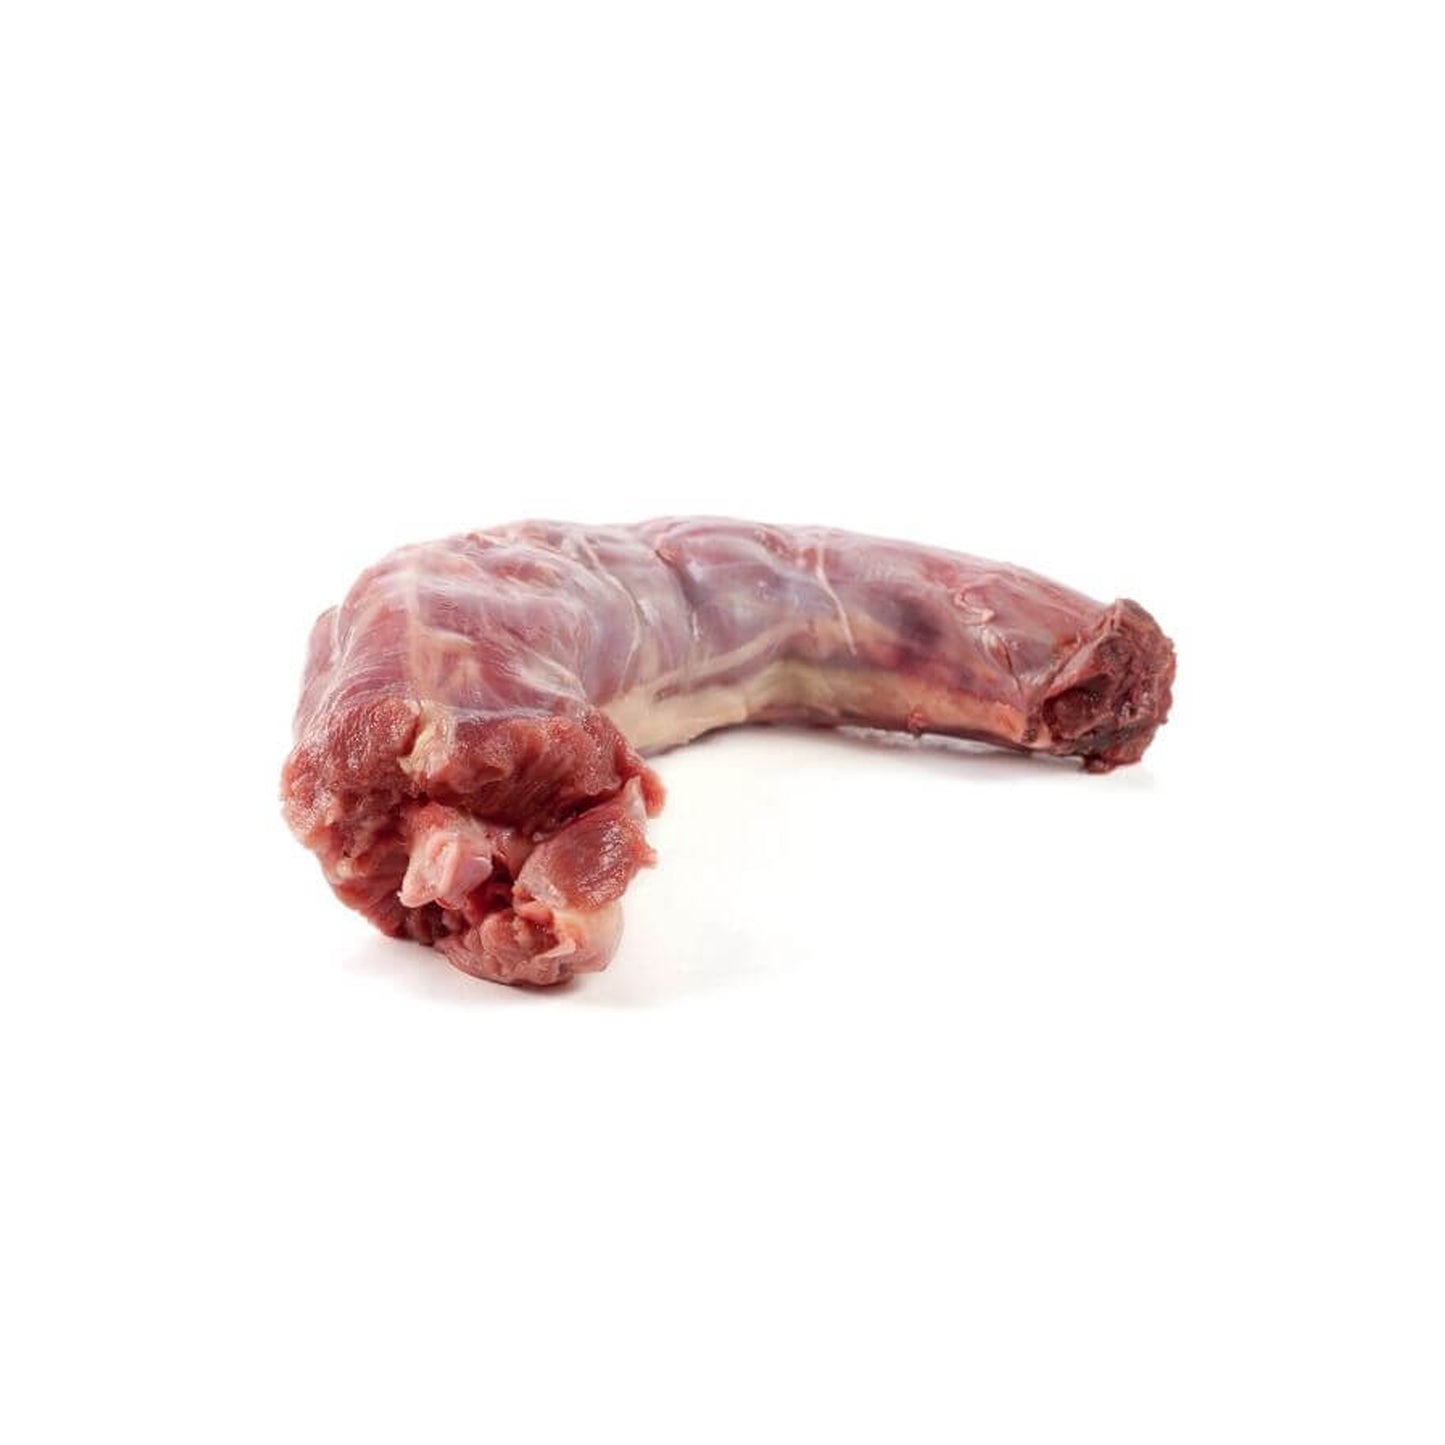 Buy Frozen Chicken Necks (2lbs) - Wholesome Dog Treats for Health and Happiness